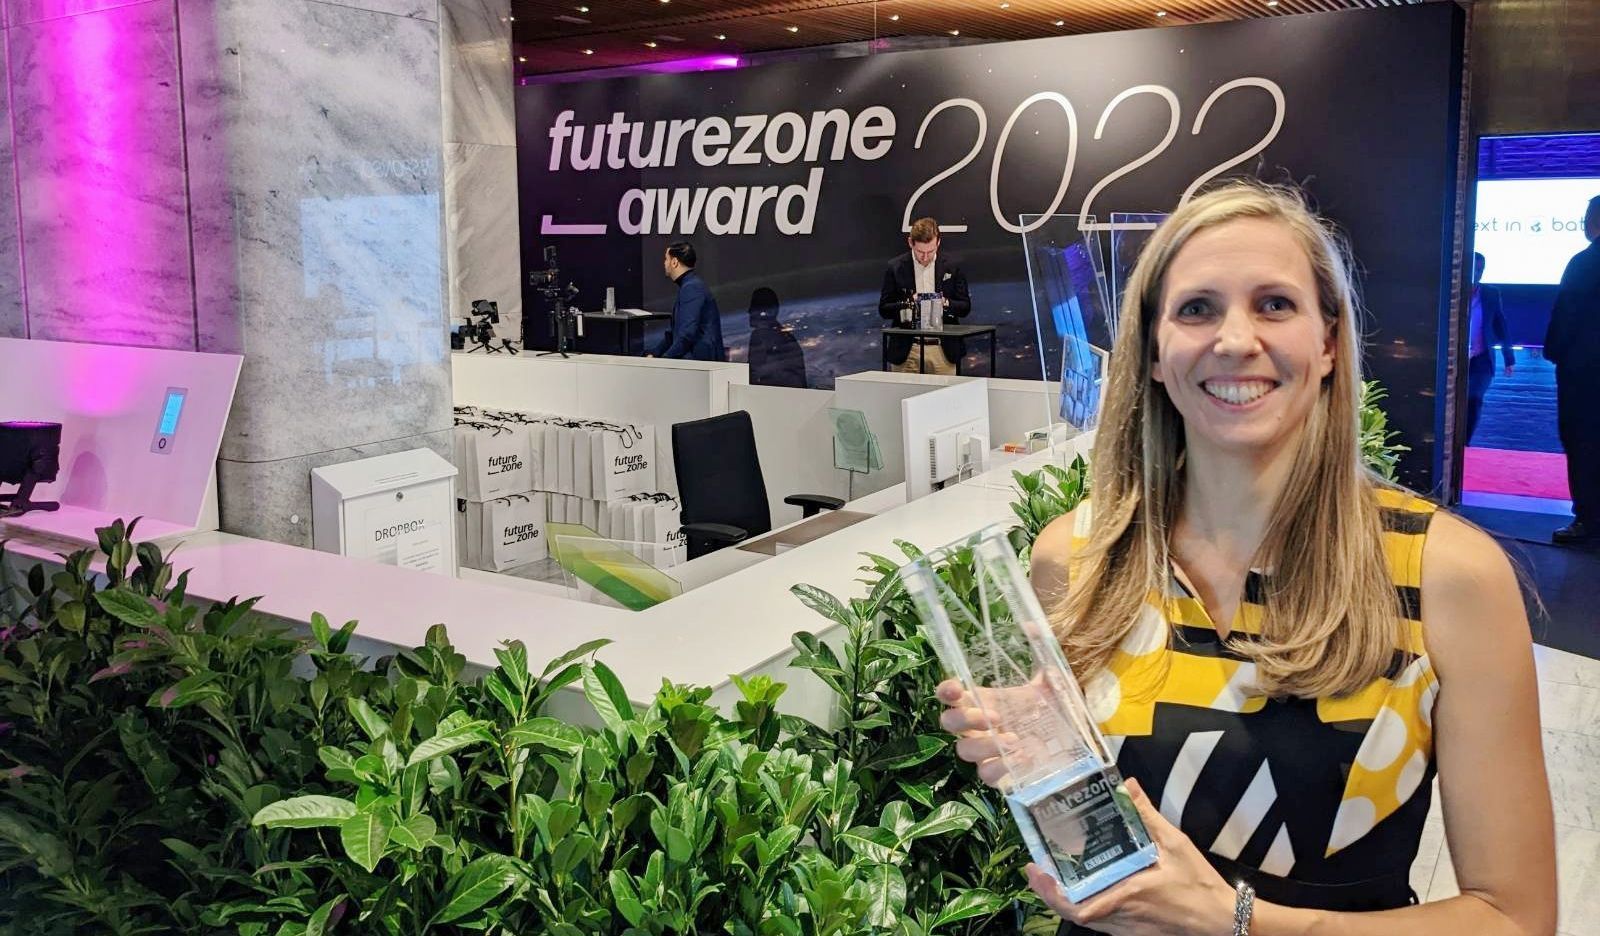 On the right edge of the picture is a woman holding a glass trophy. In the background the lettering "Futurezone Awards 2022".